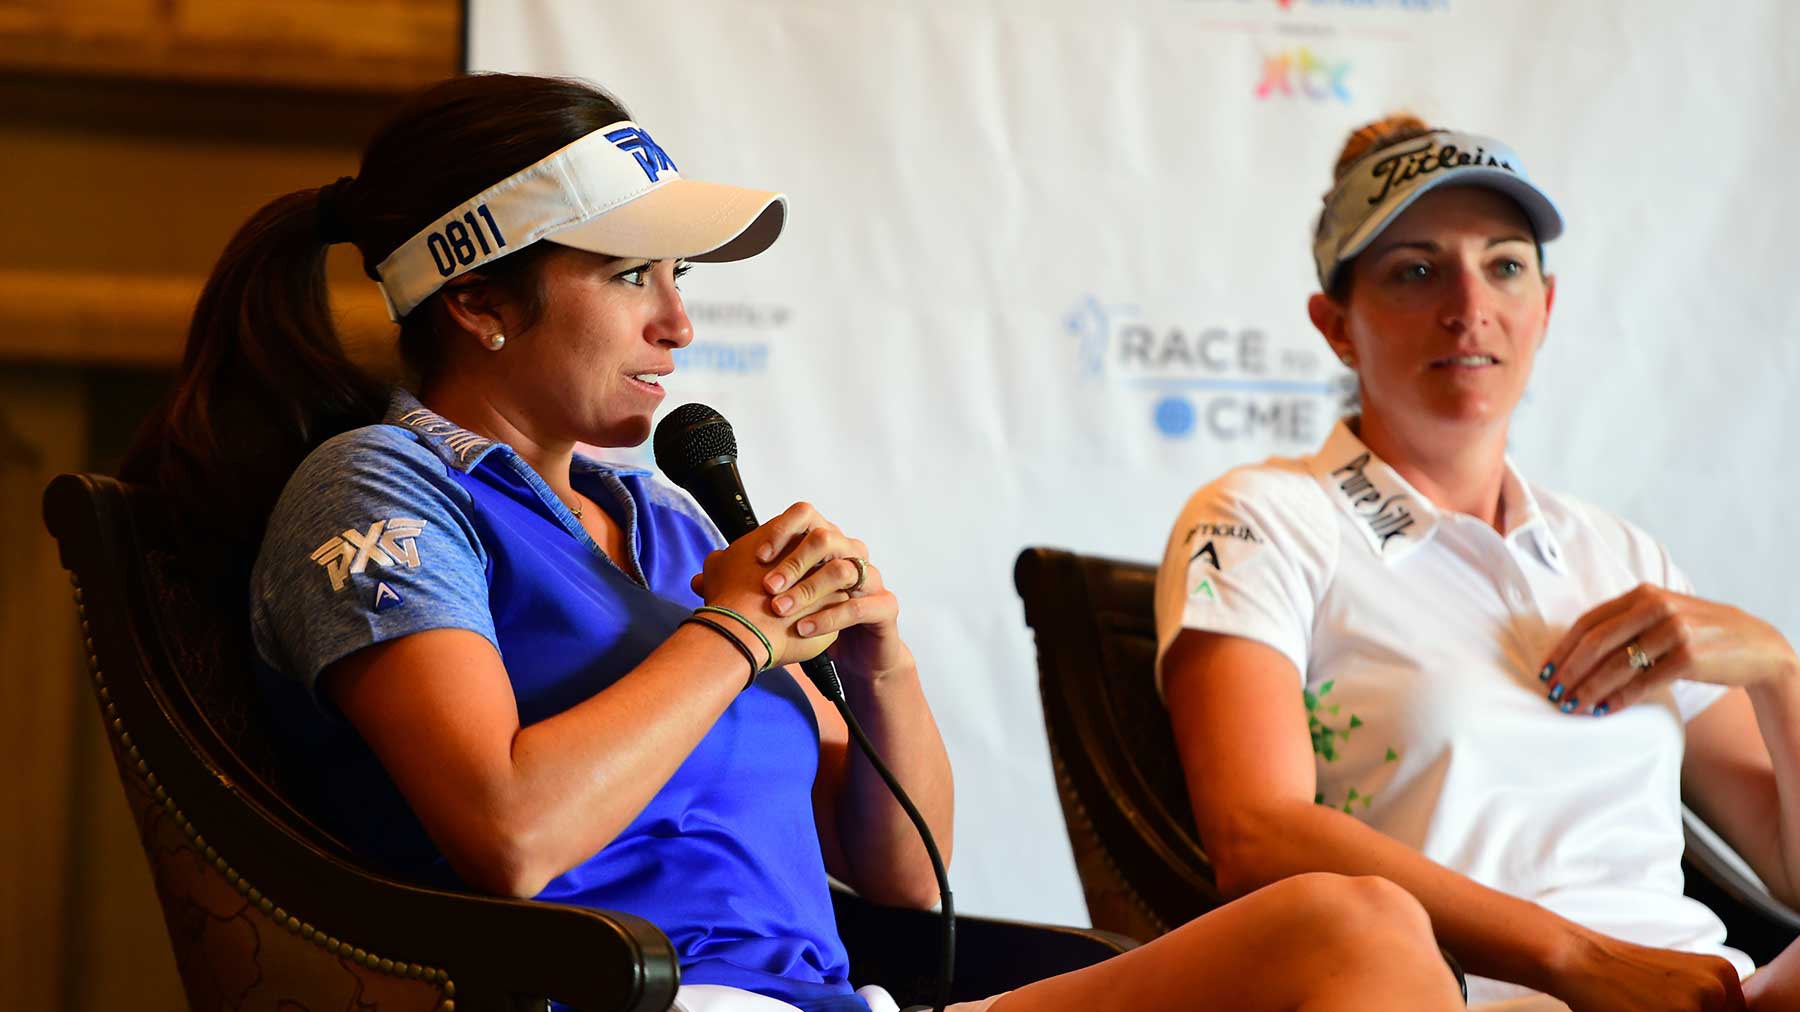 Gerina Piller (left) and Brittany Lang talk to the media before the 2016 VOA Texas Shootout Presented by JTBC